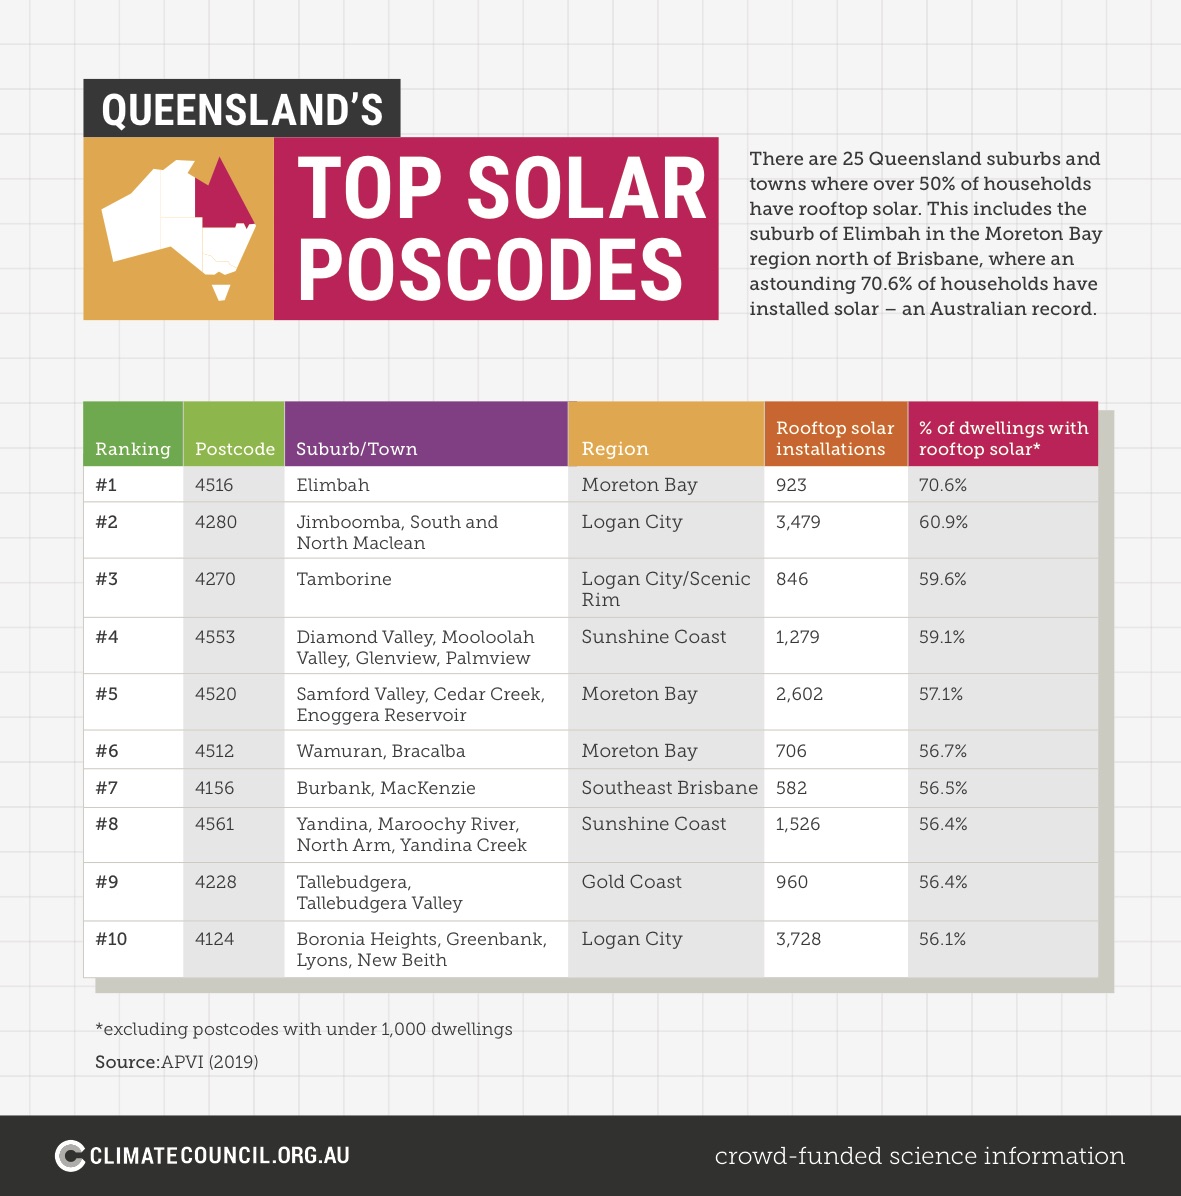 A table consisting of the top 10 solar postcodes in Queensland.